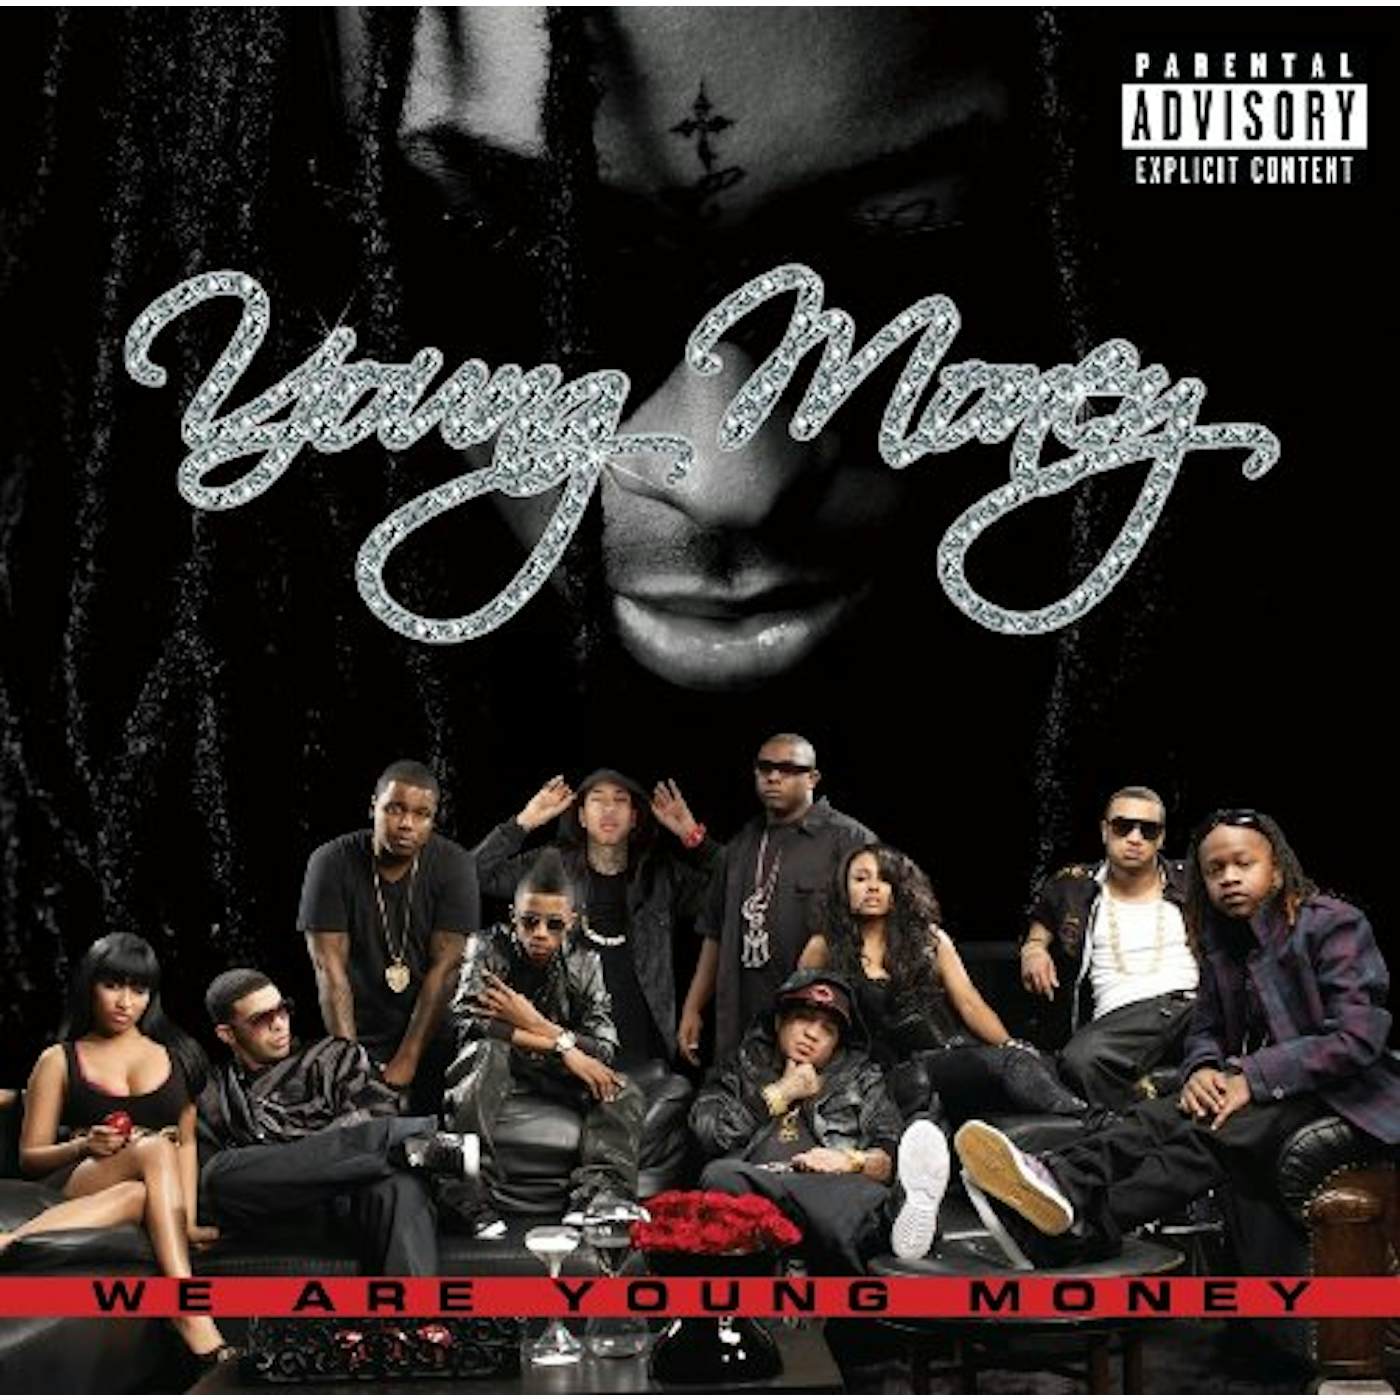 WE ARE YOUNG MONEY CD